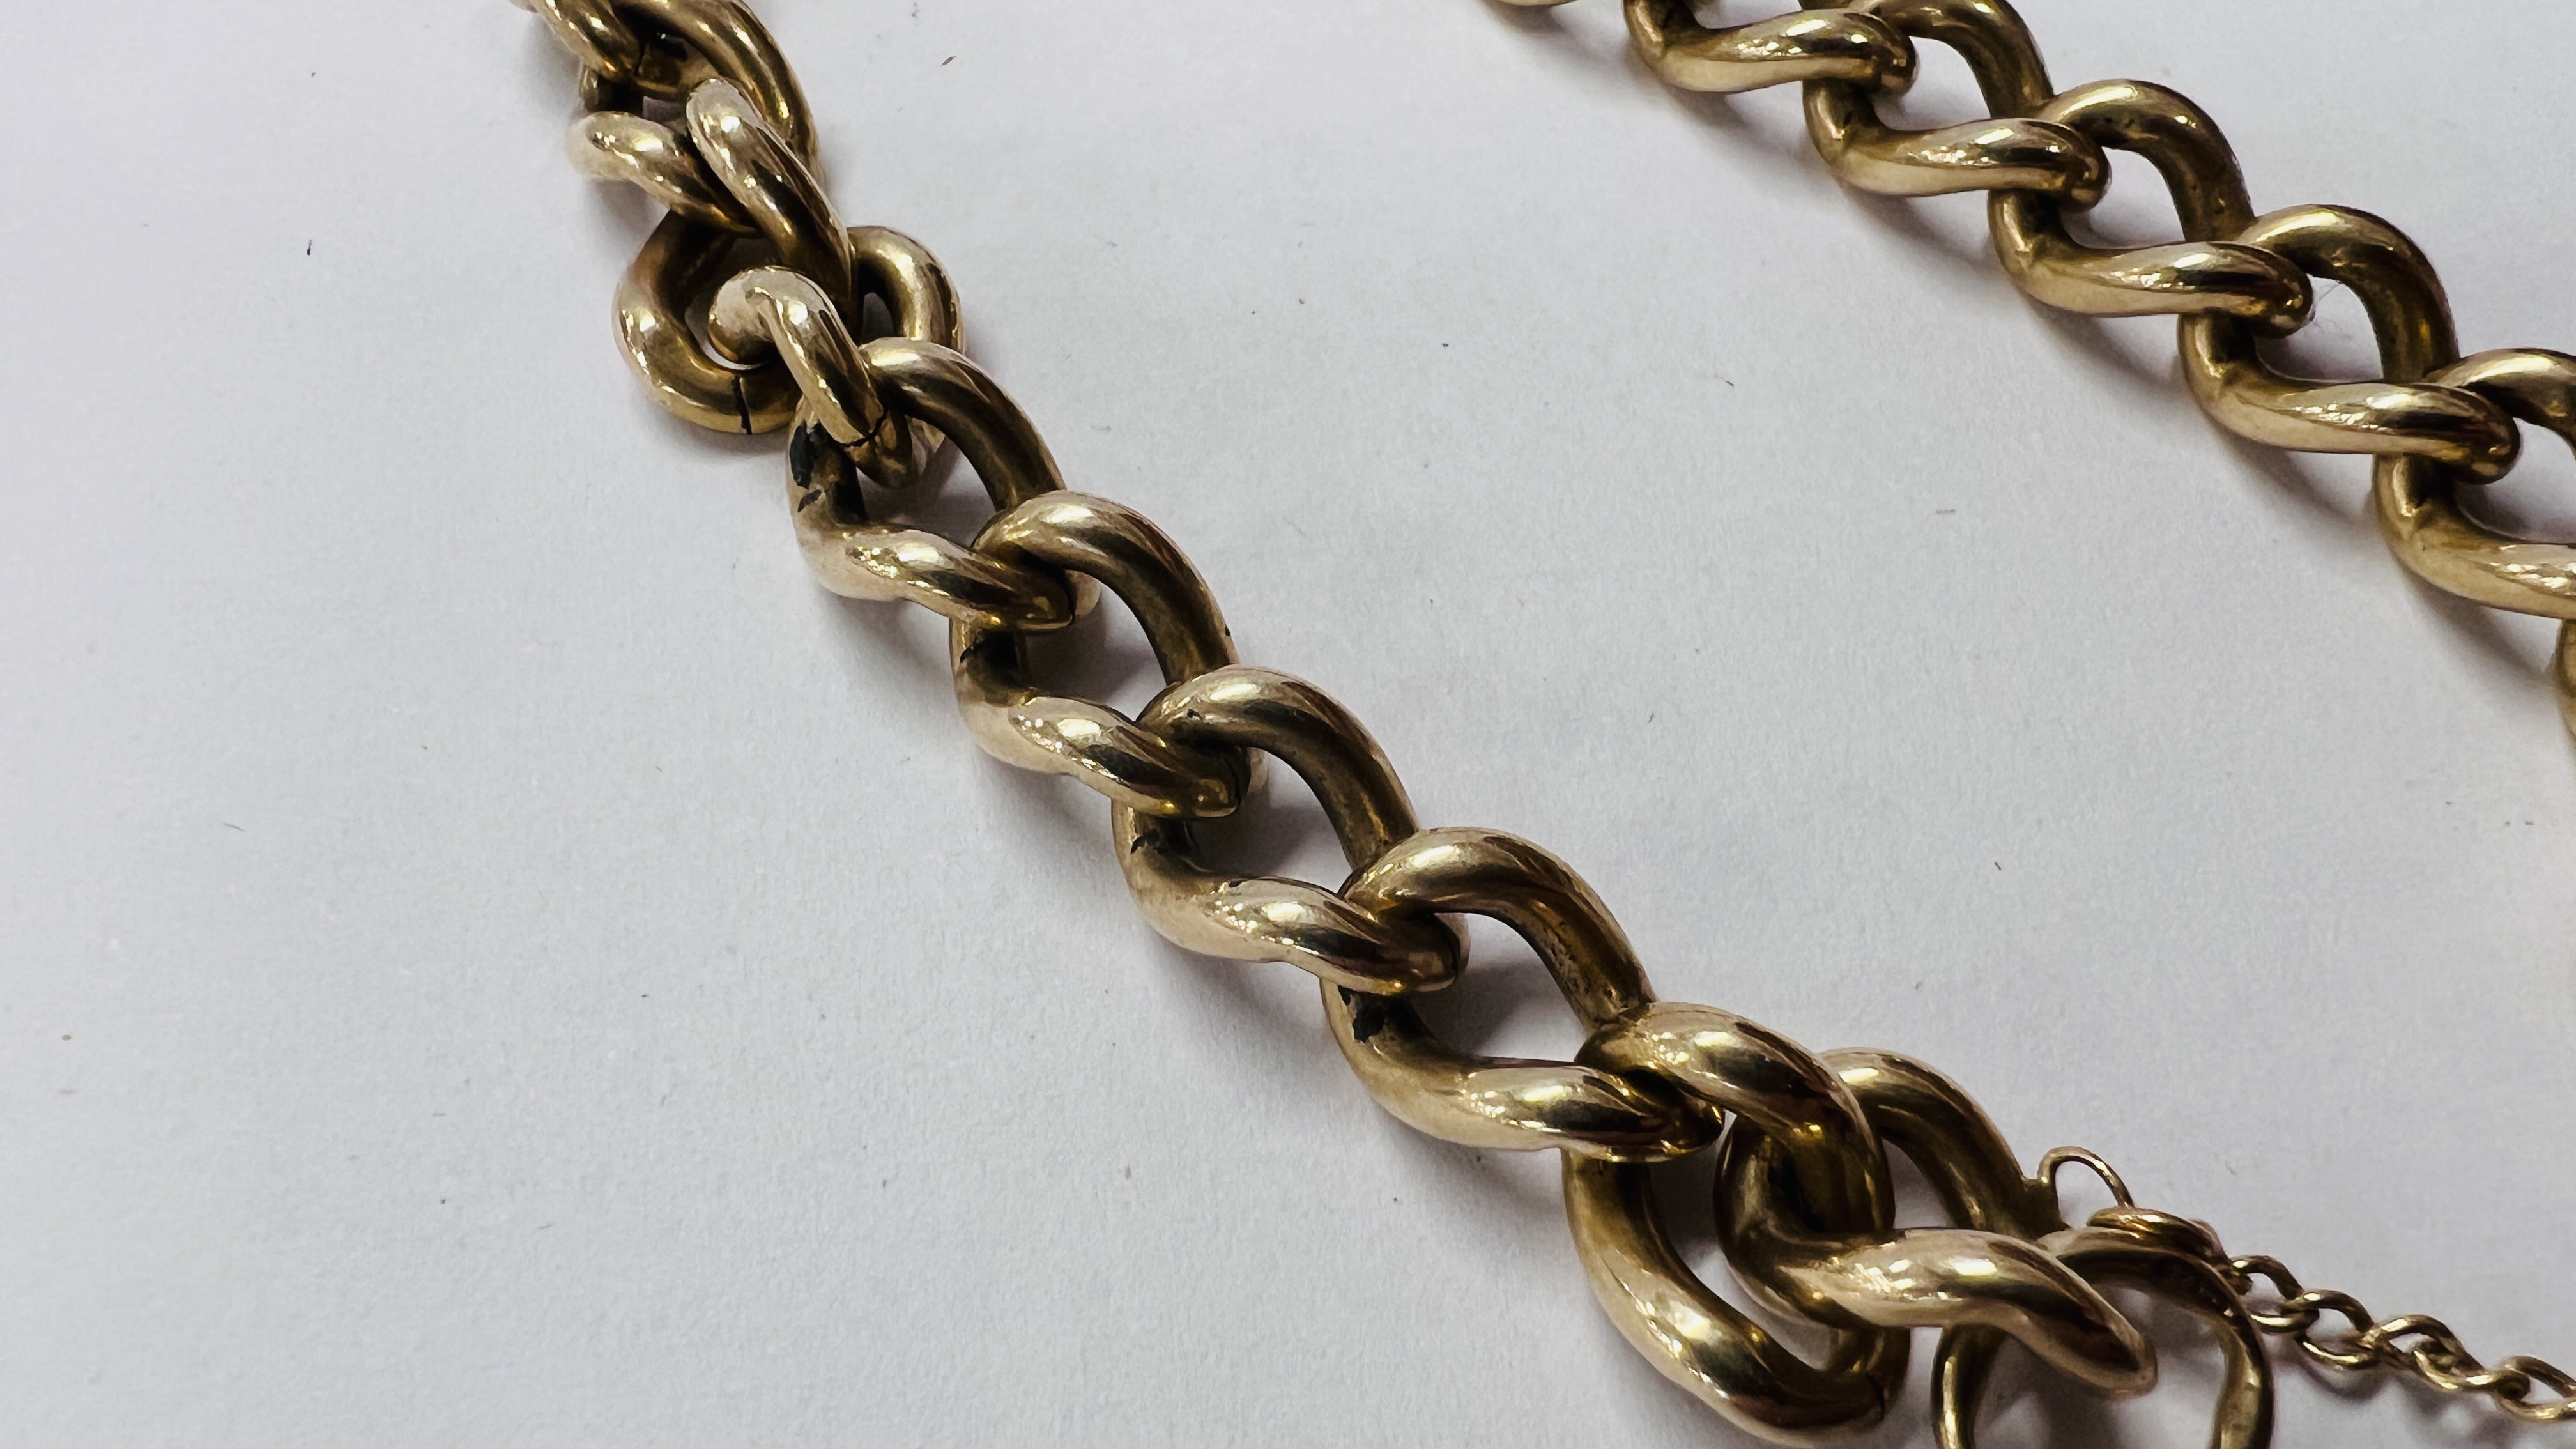 A 9CT GOLD BRACELET WITH PADLOCK CLASP. - Image 3 of 8